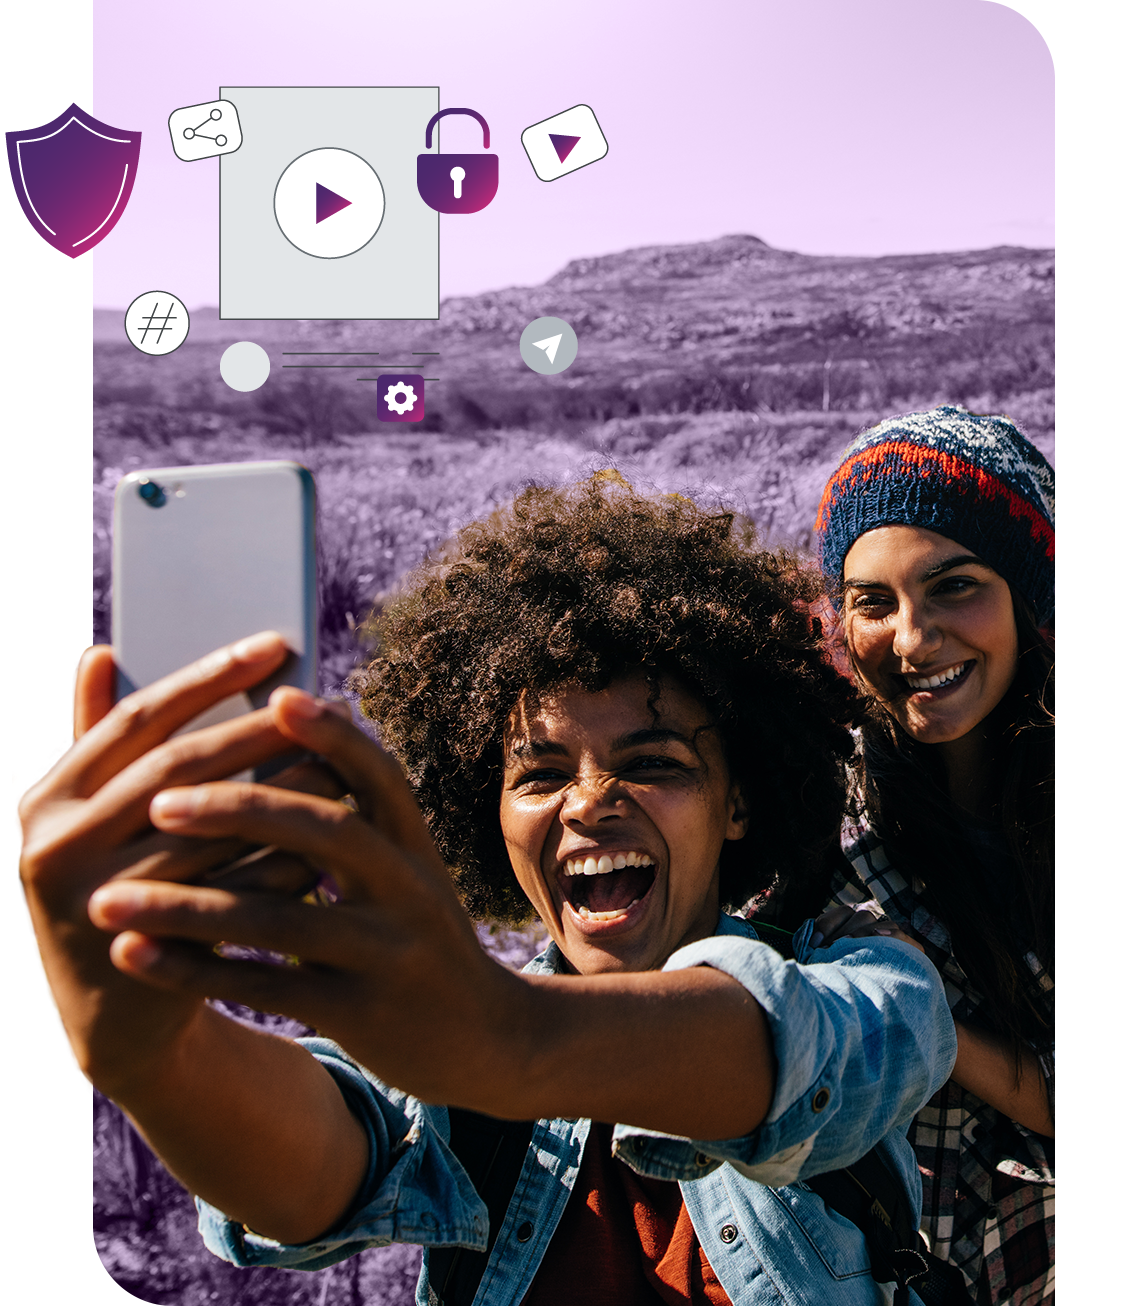 Two women taking a selfie. Icons for security, and user generated content are overlaid.